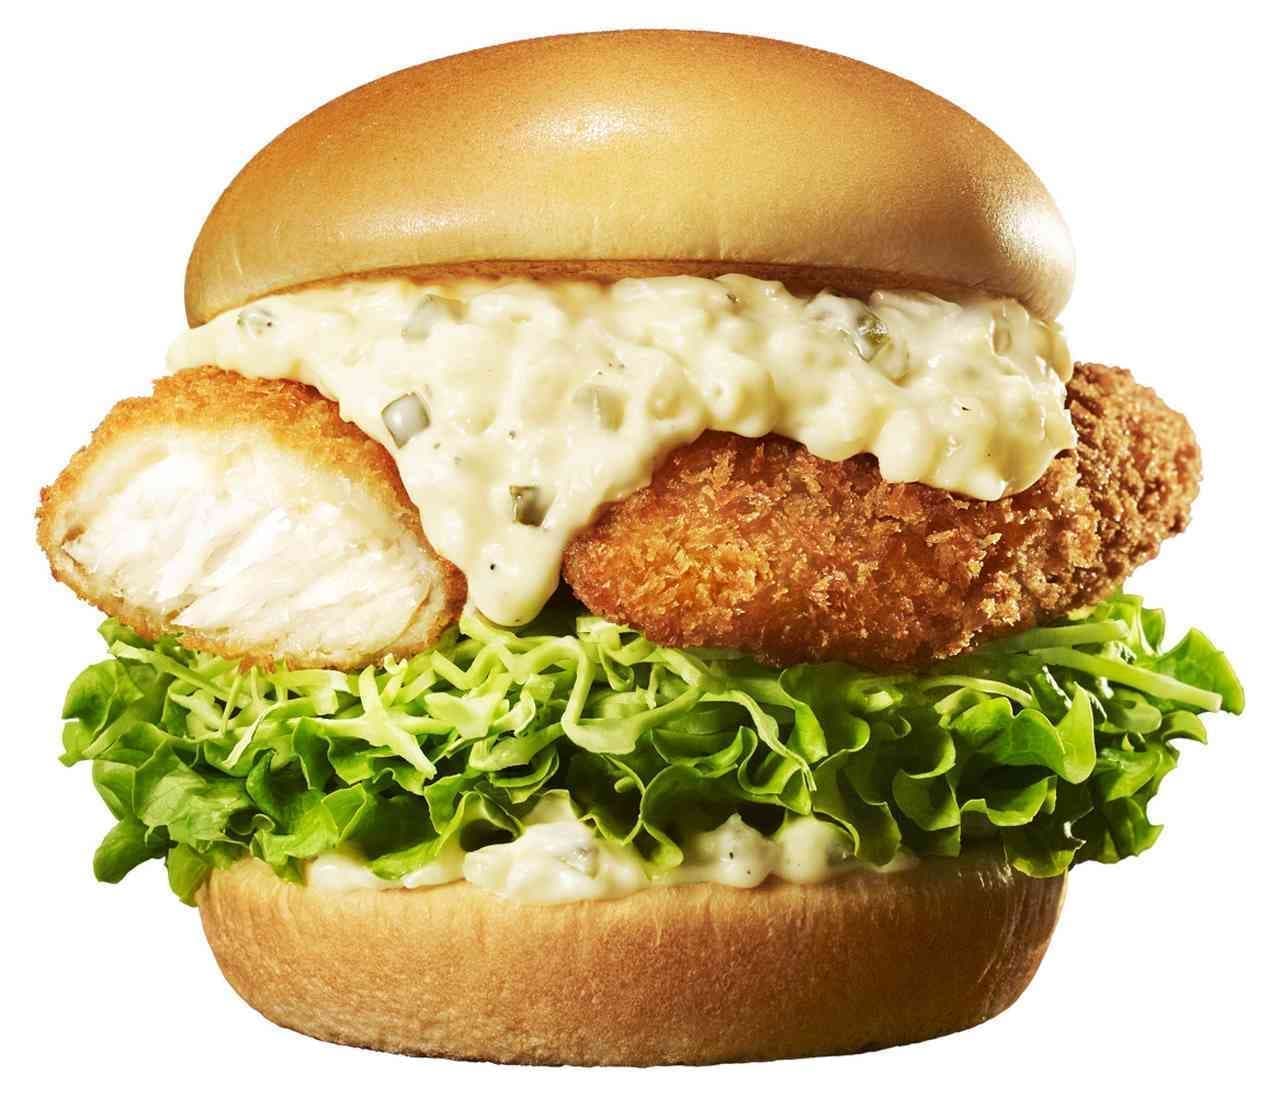 Mos Burger "Japanese production area support burger Red sea bream cutlet [Ainan Town, Ehime Prefecture]"